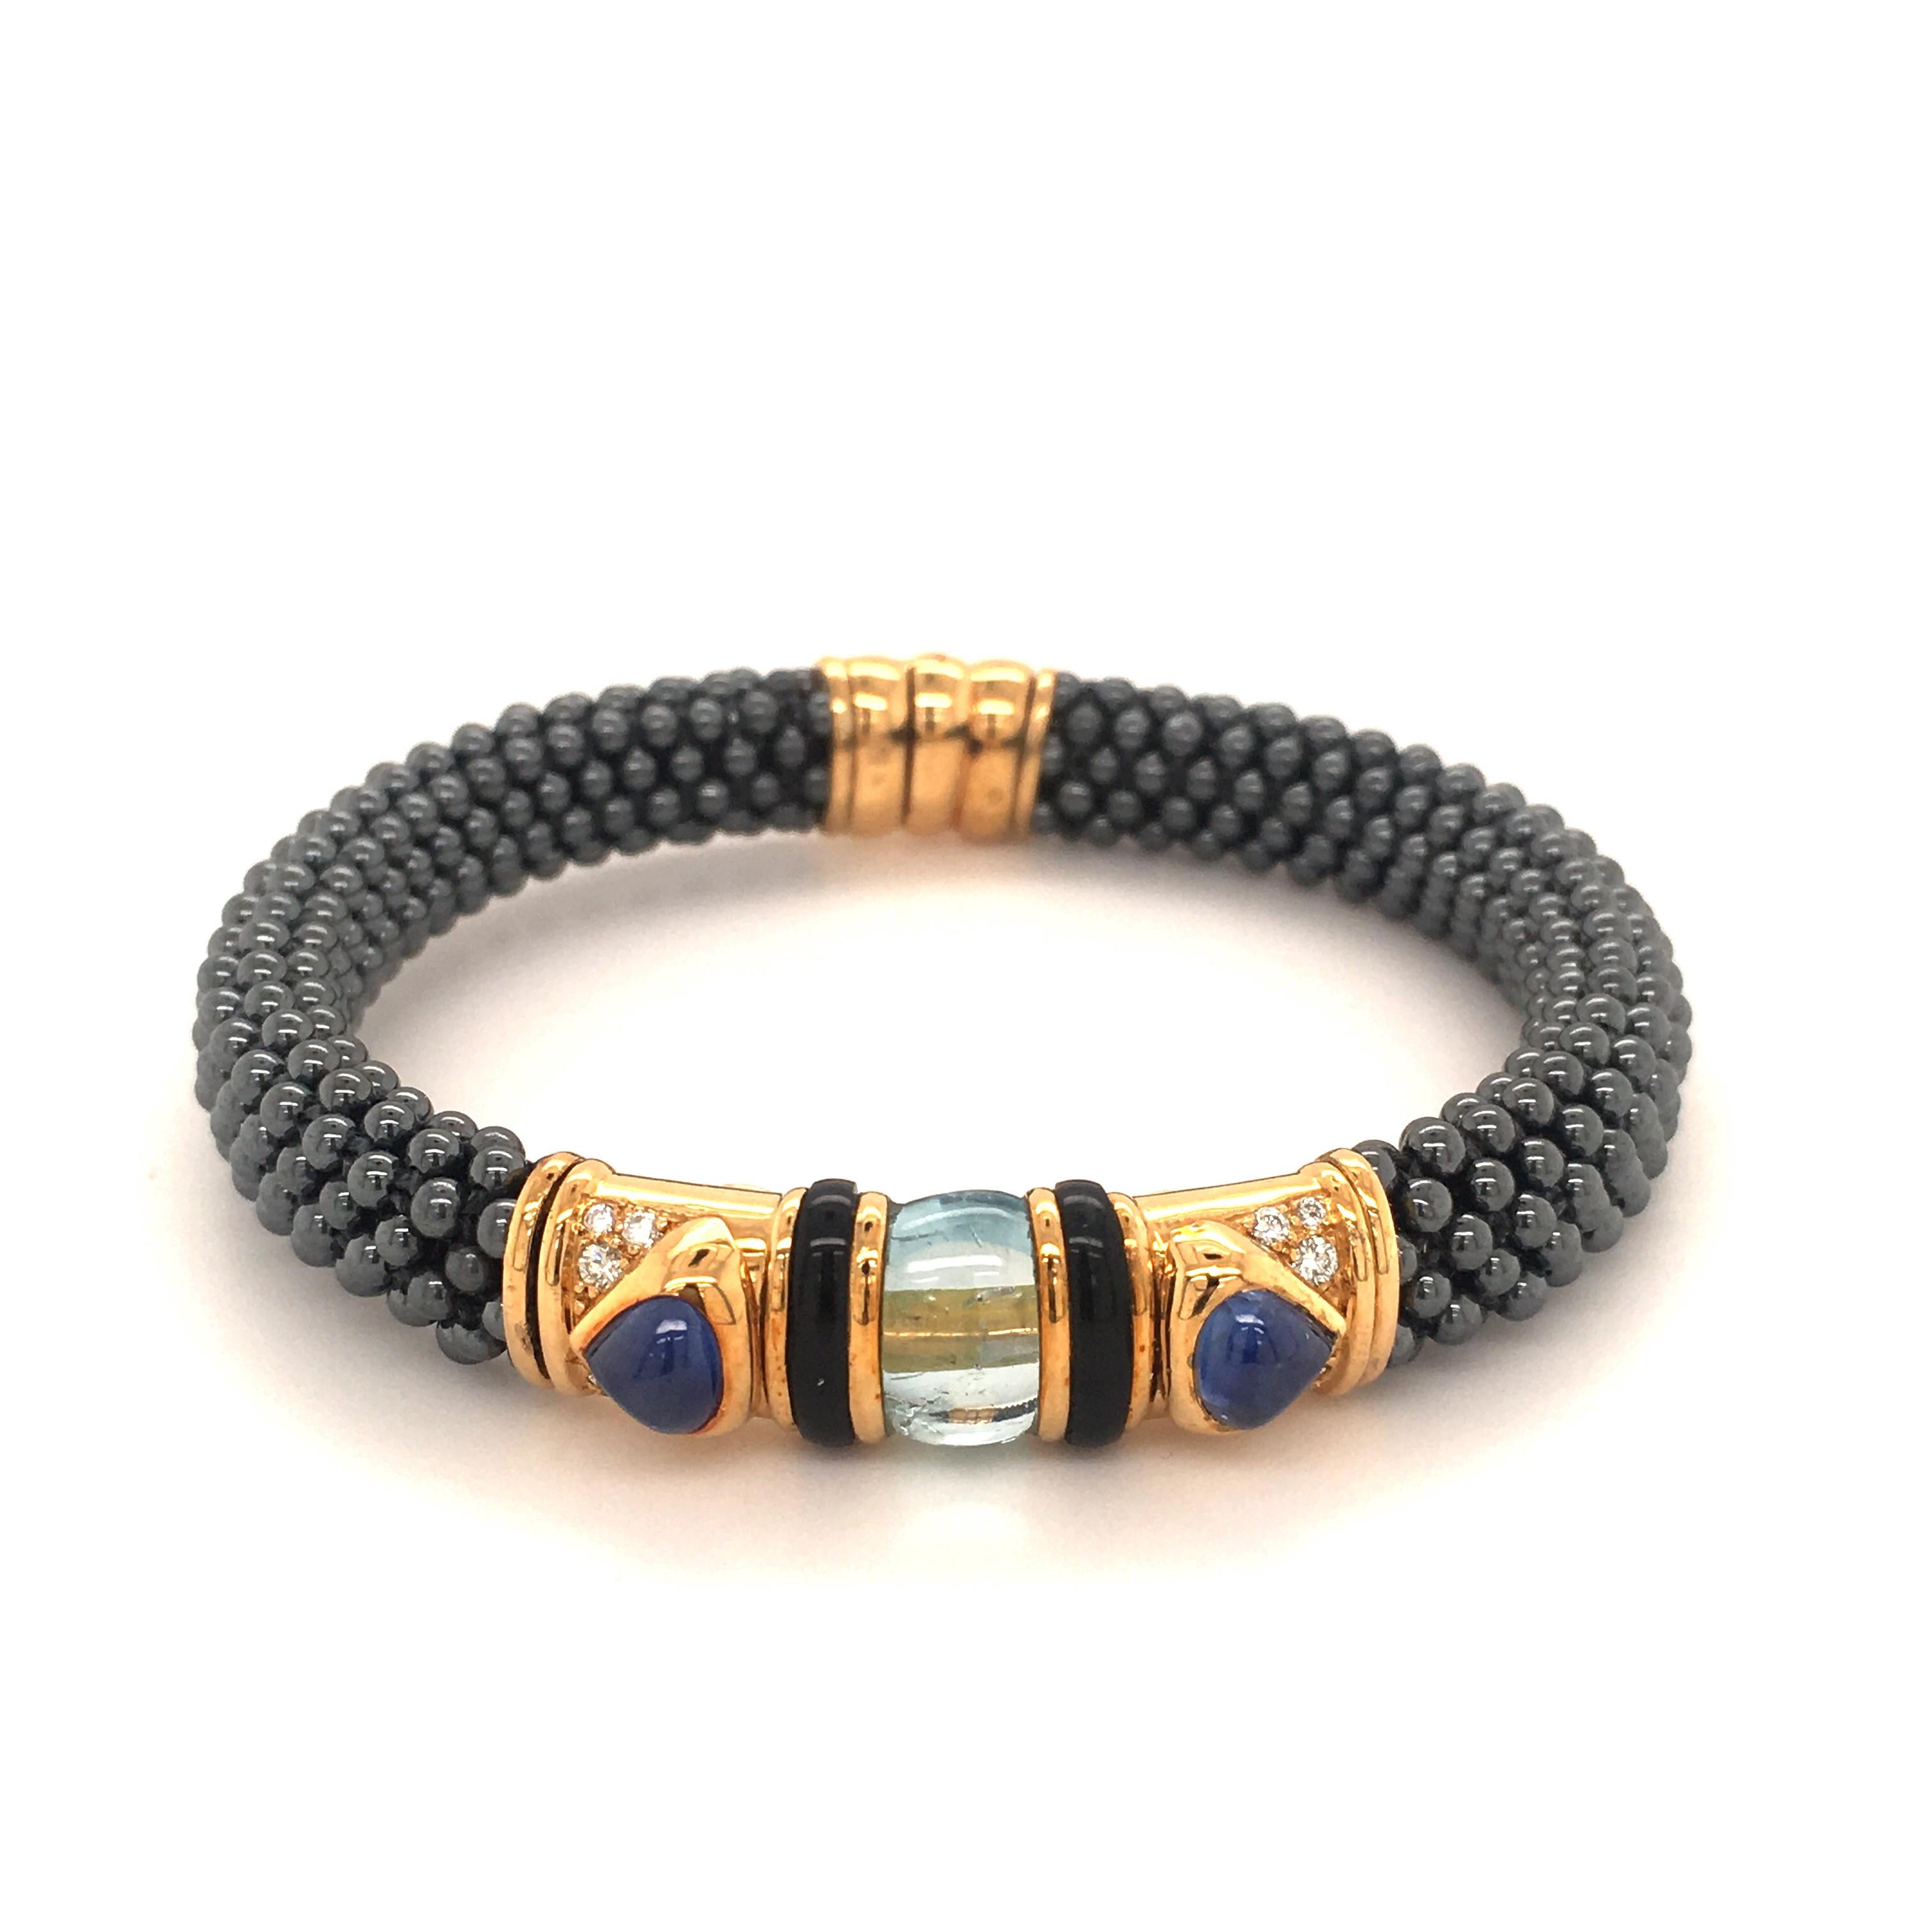 Marina B 'Najwa' 1982 Bracelet braided with Hematite beads.
2 blue Sapphire-Cabochons and an Aquamarine are set in 18 kt Yellow Gold with 12 Diamonds.
The sporty and uncomplicated look makes it the perfect accessory for the summer.
(Bracelet is